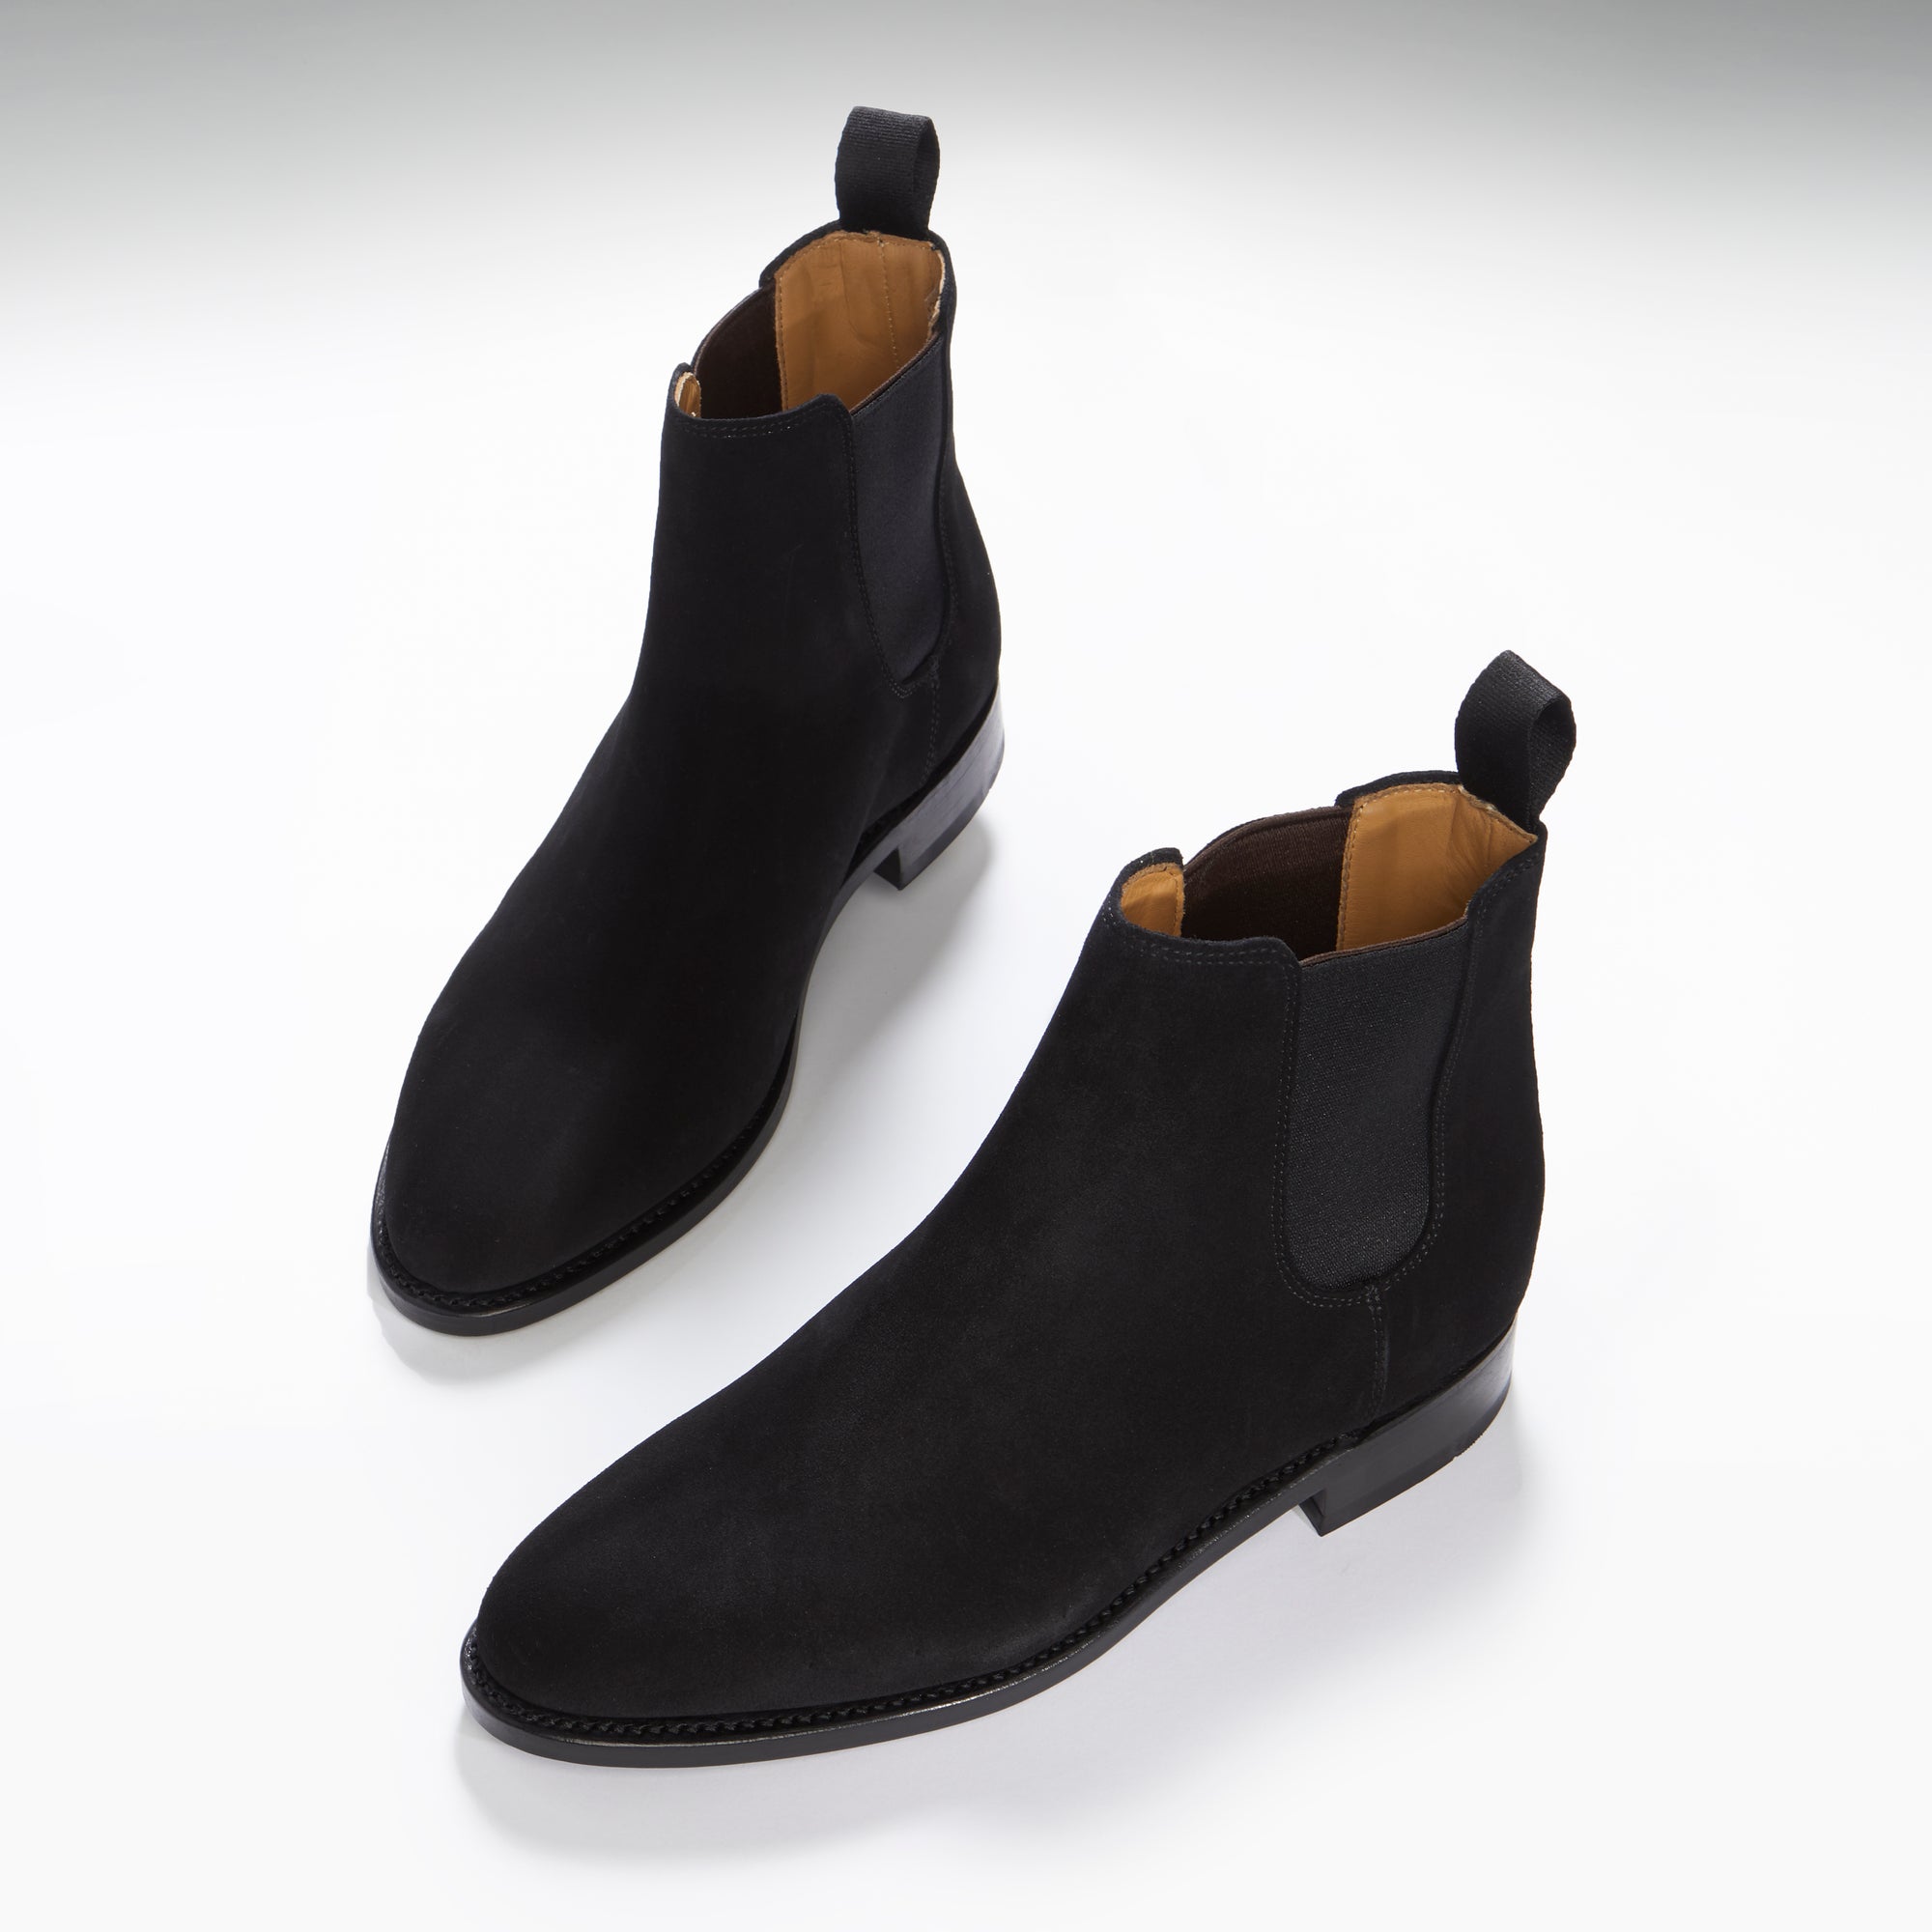 Women's Black Suede Chelsea Boots, Welted Leather Sole - Hugs & Co.